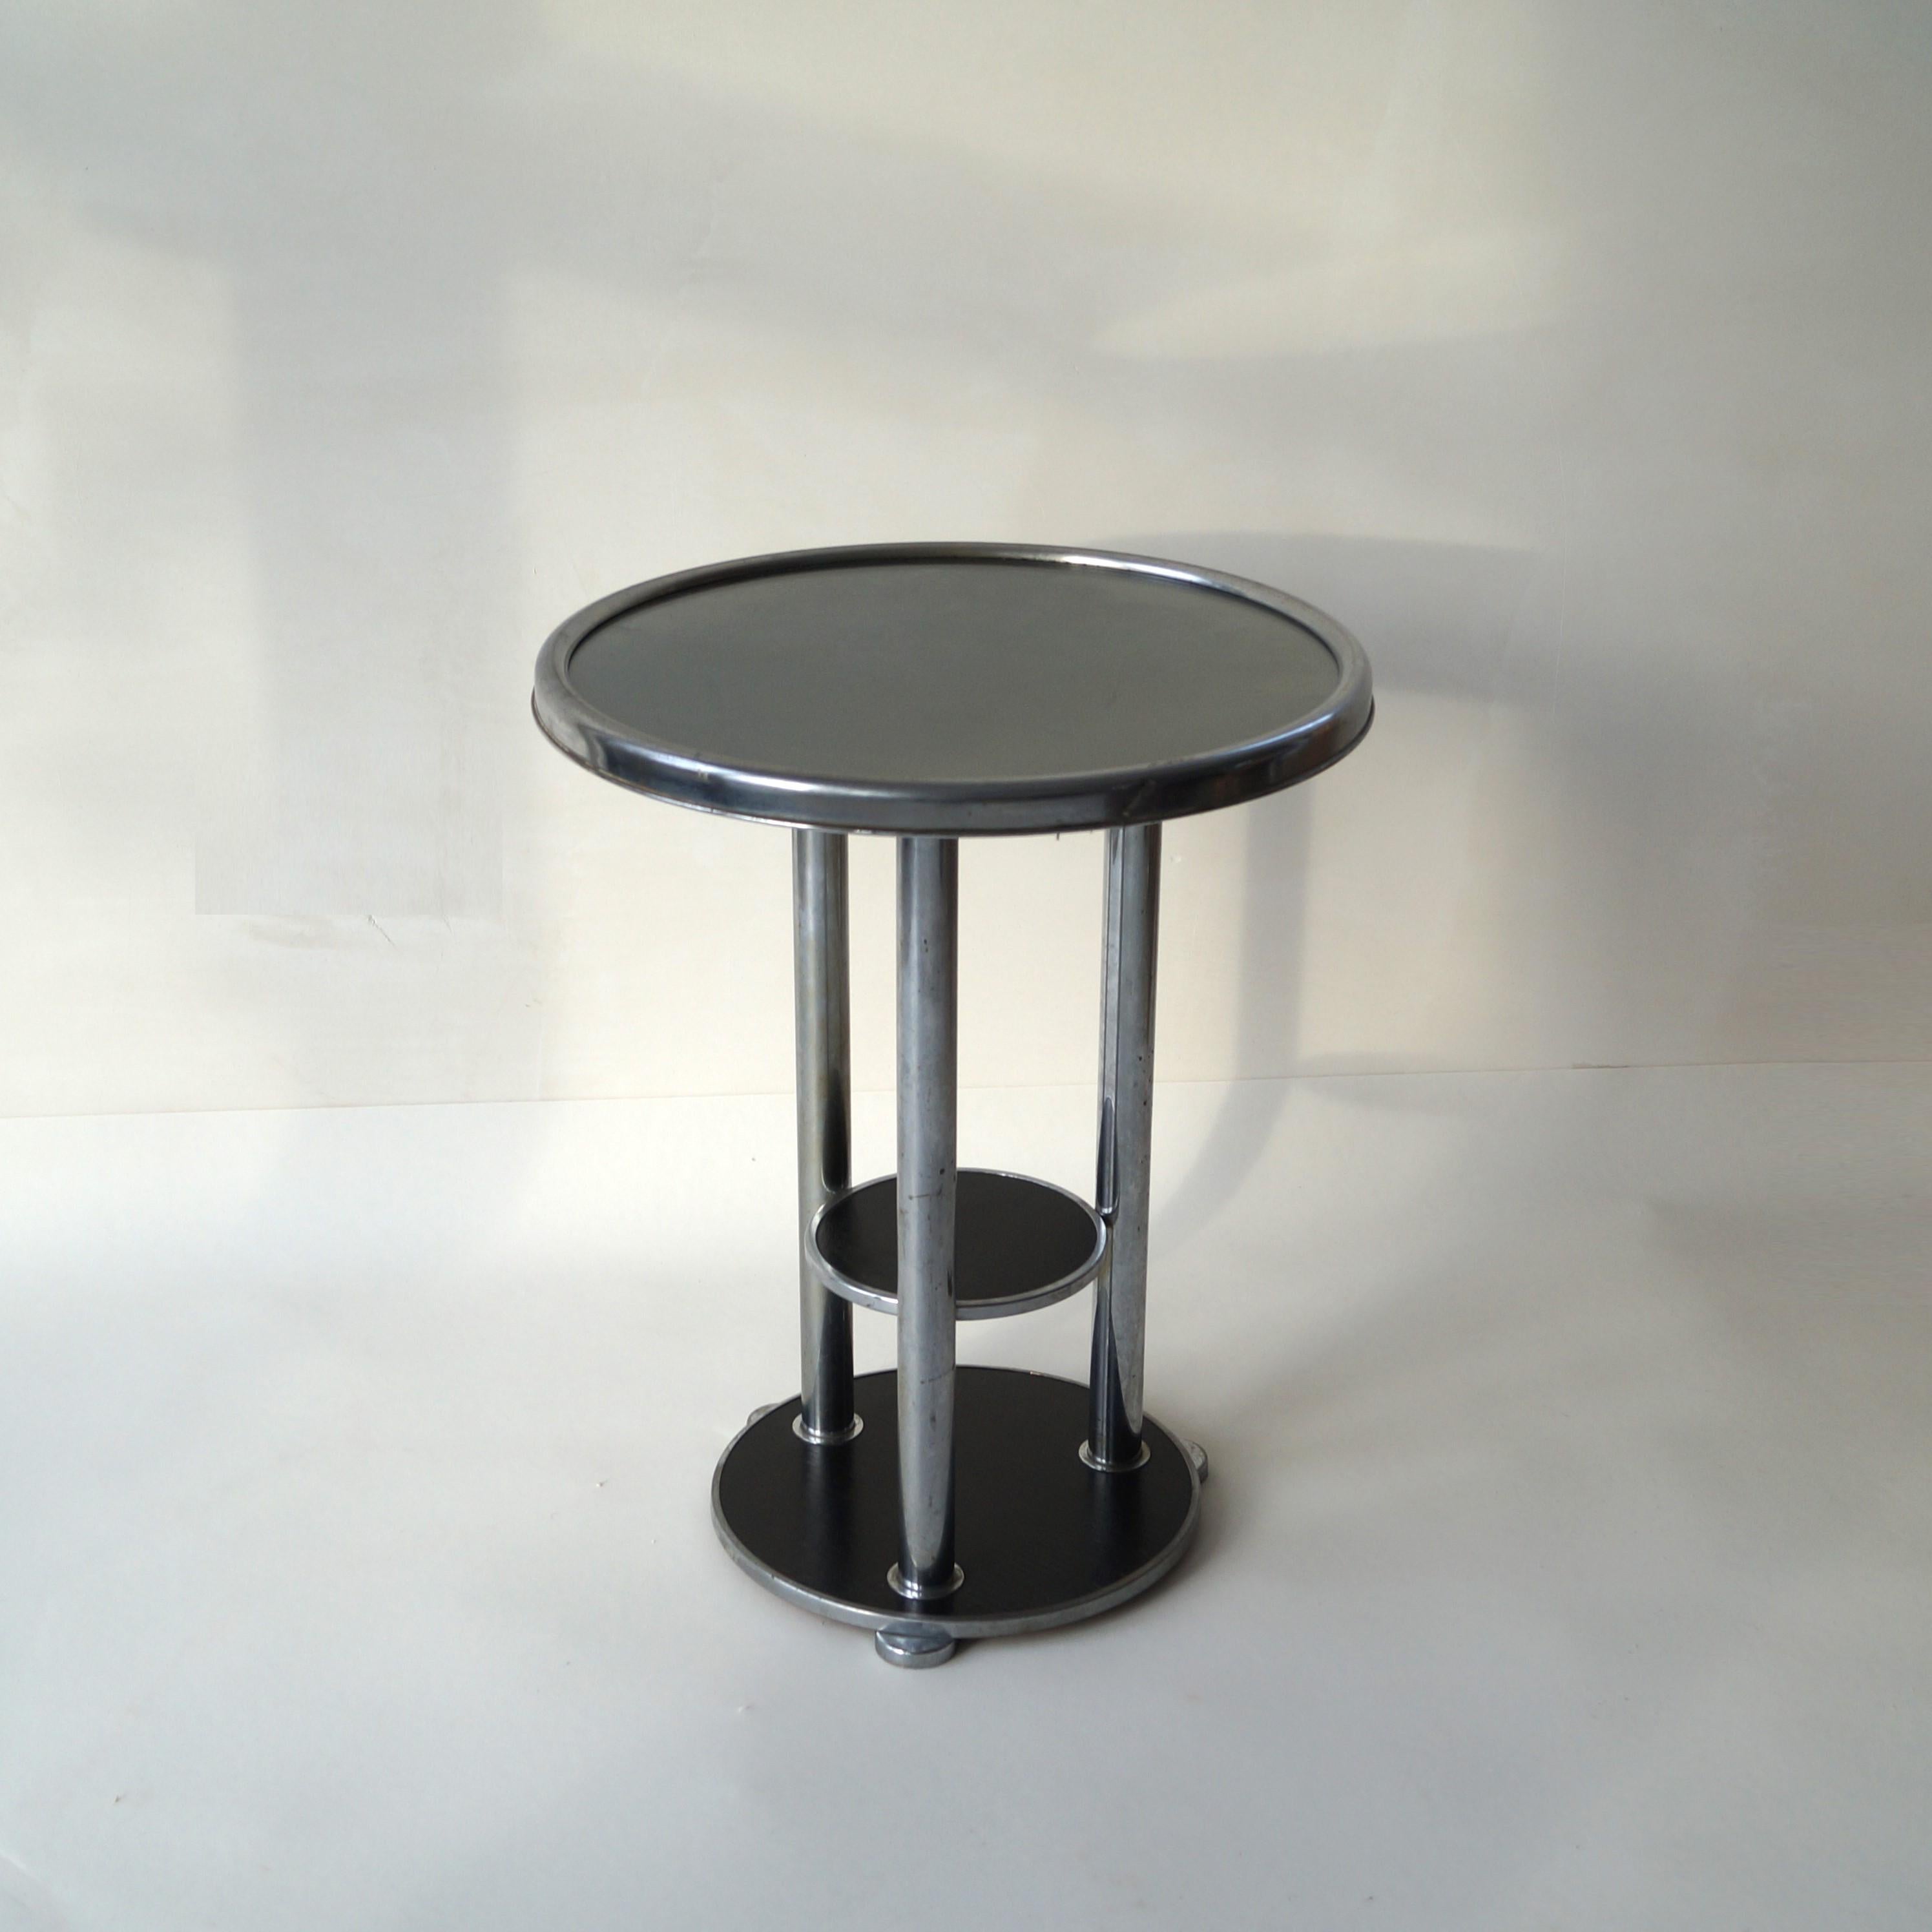 A rare design three tiered bauhaus table, Netherlands, 1930s. The unusual design gives it a very modernist appearance. The modest size makes it an ideal piece to use for a special accent in a room. Combines well with minimalist bauhaus furniture,